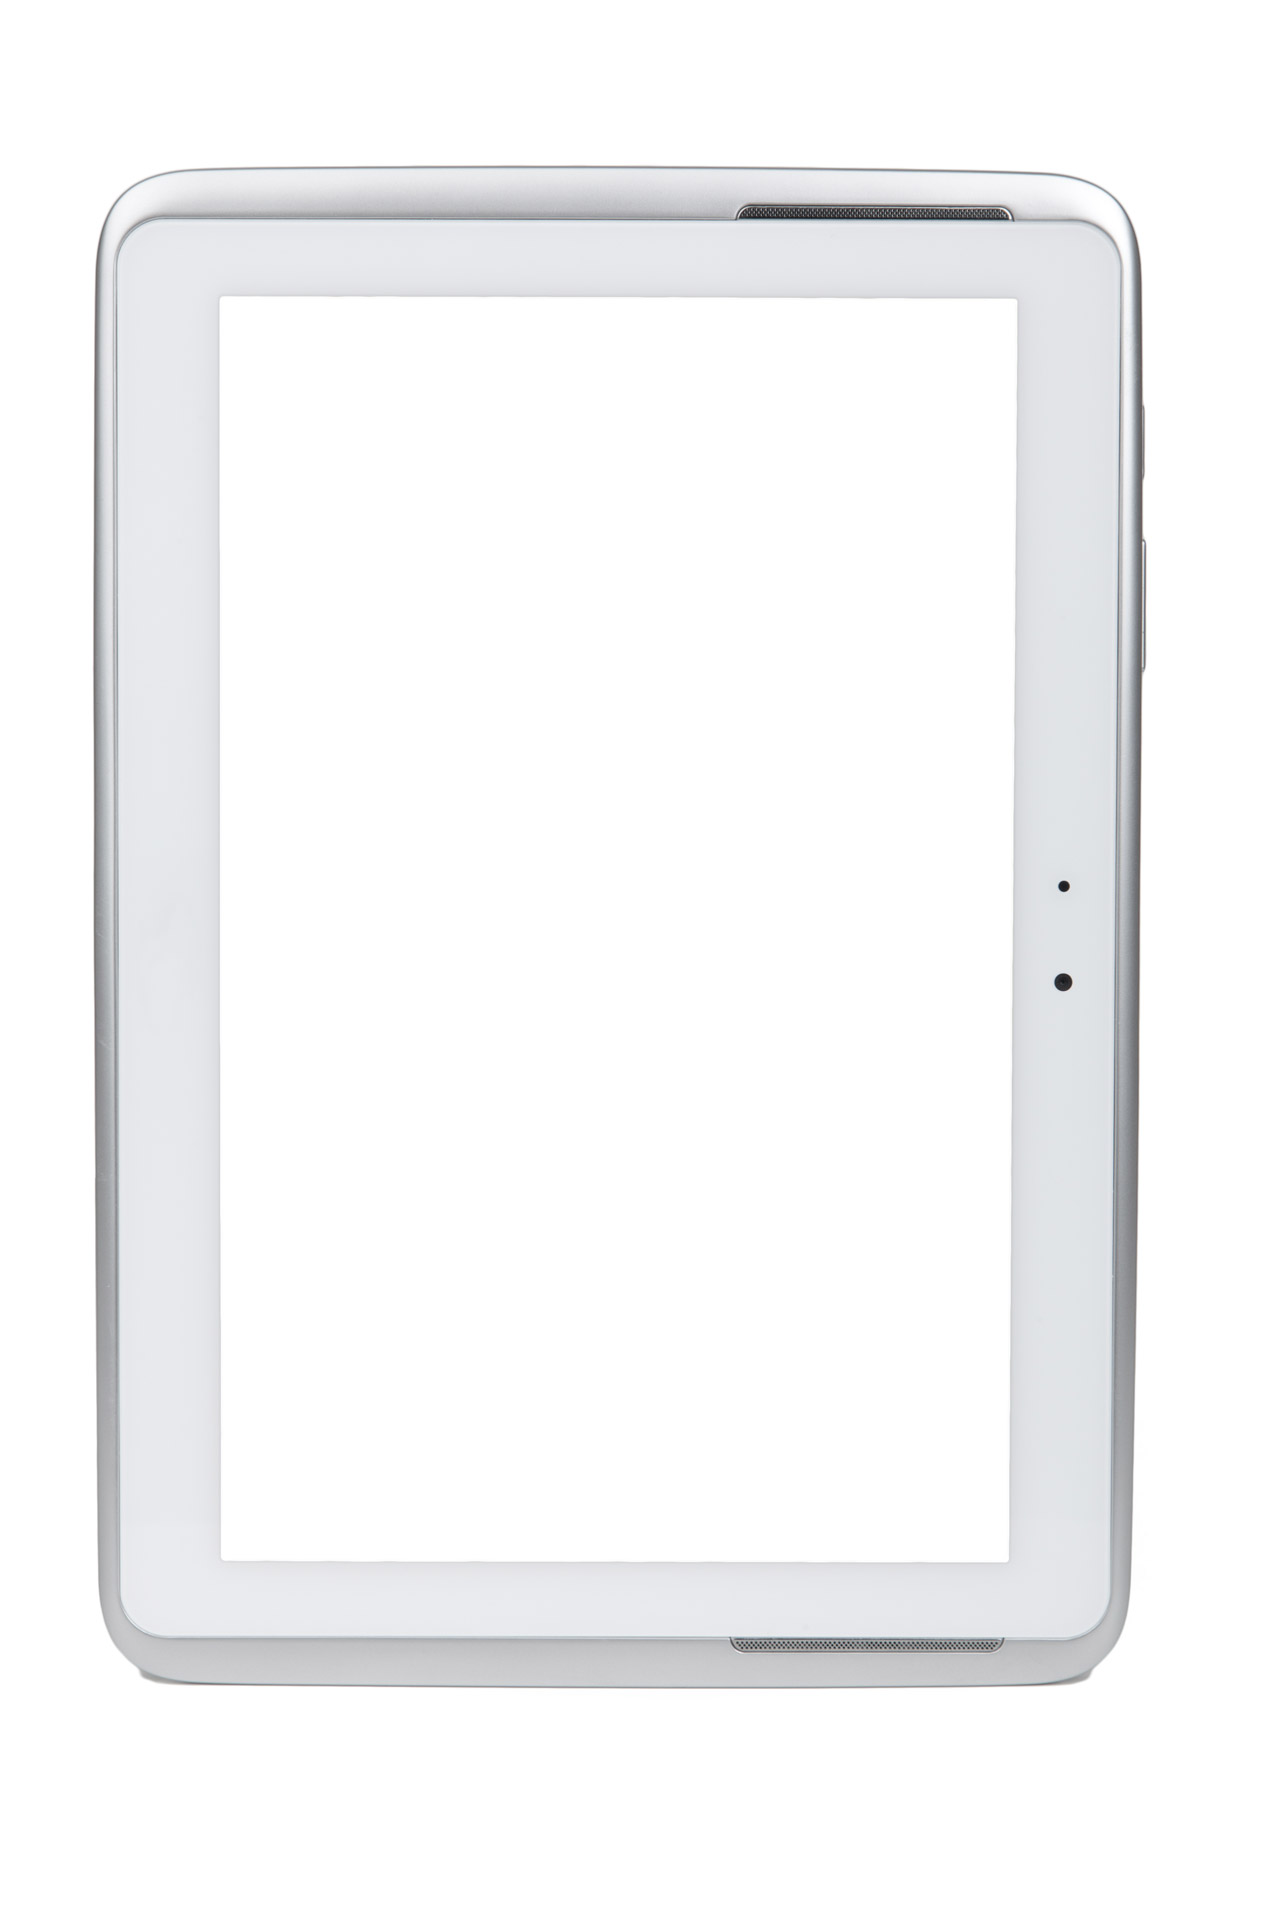 Tablet With Blank Screen